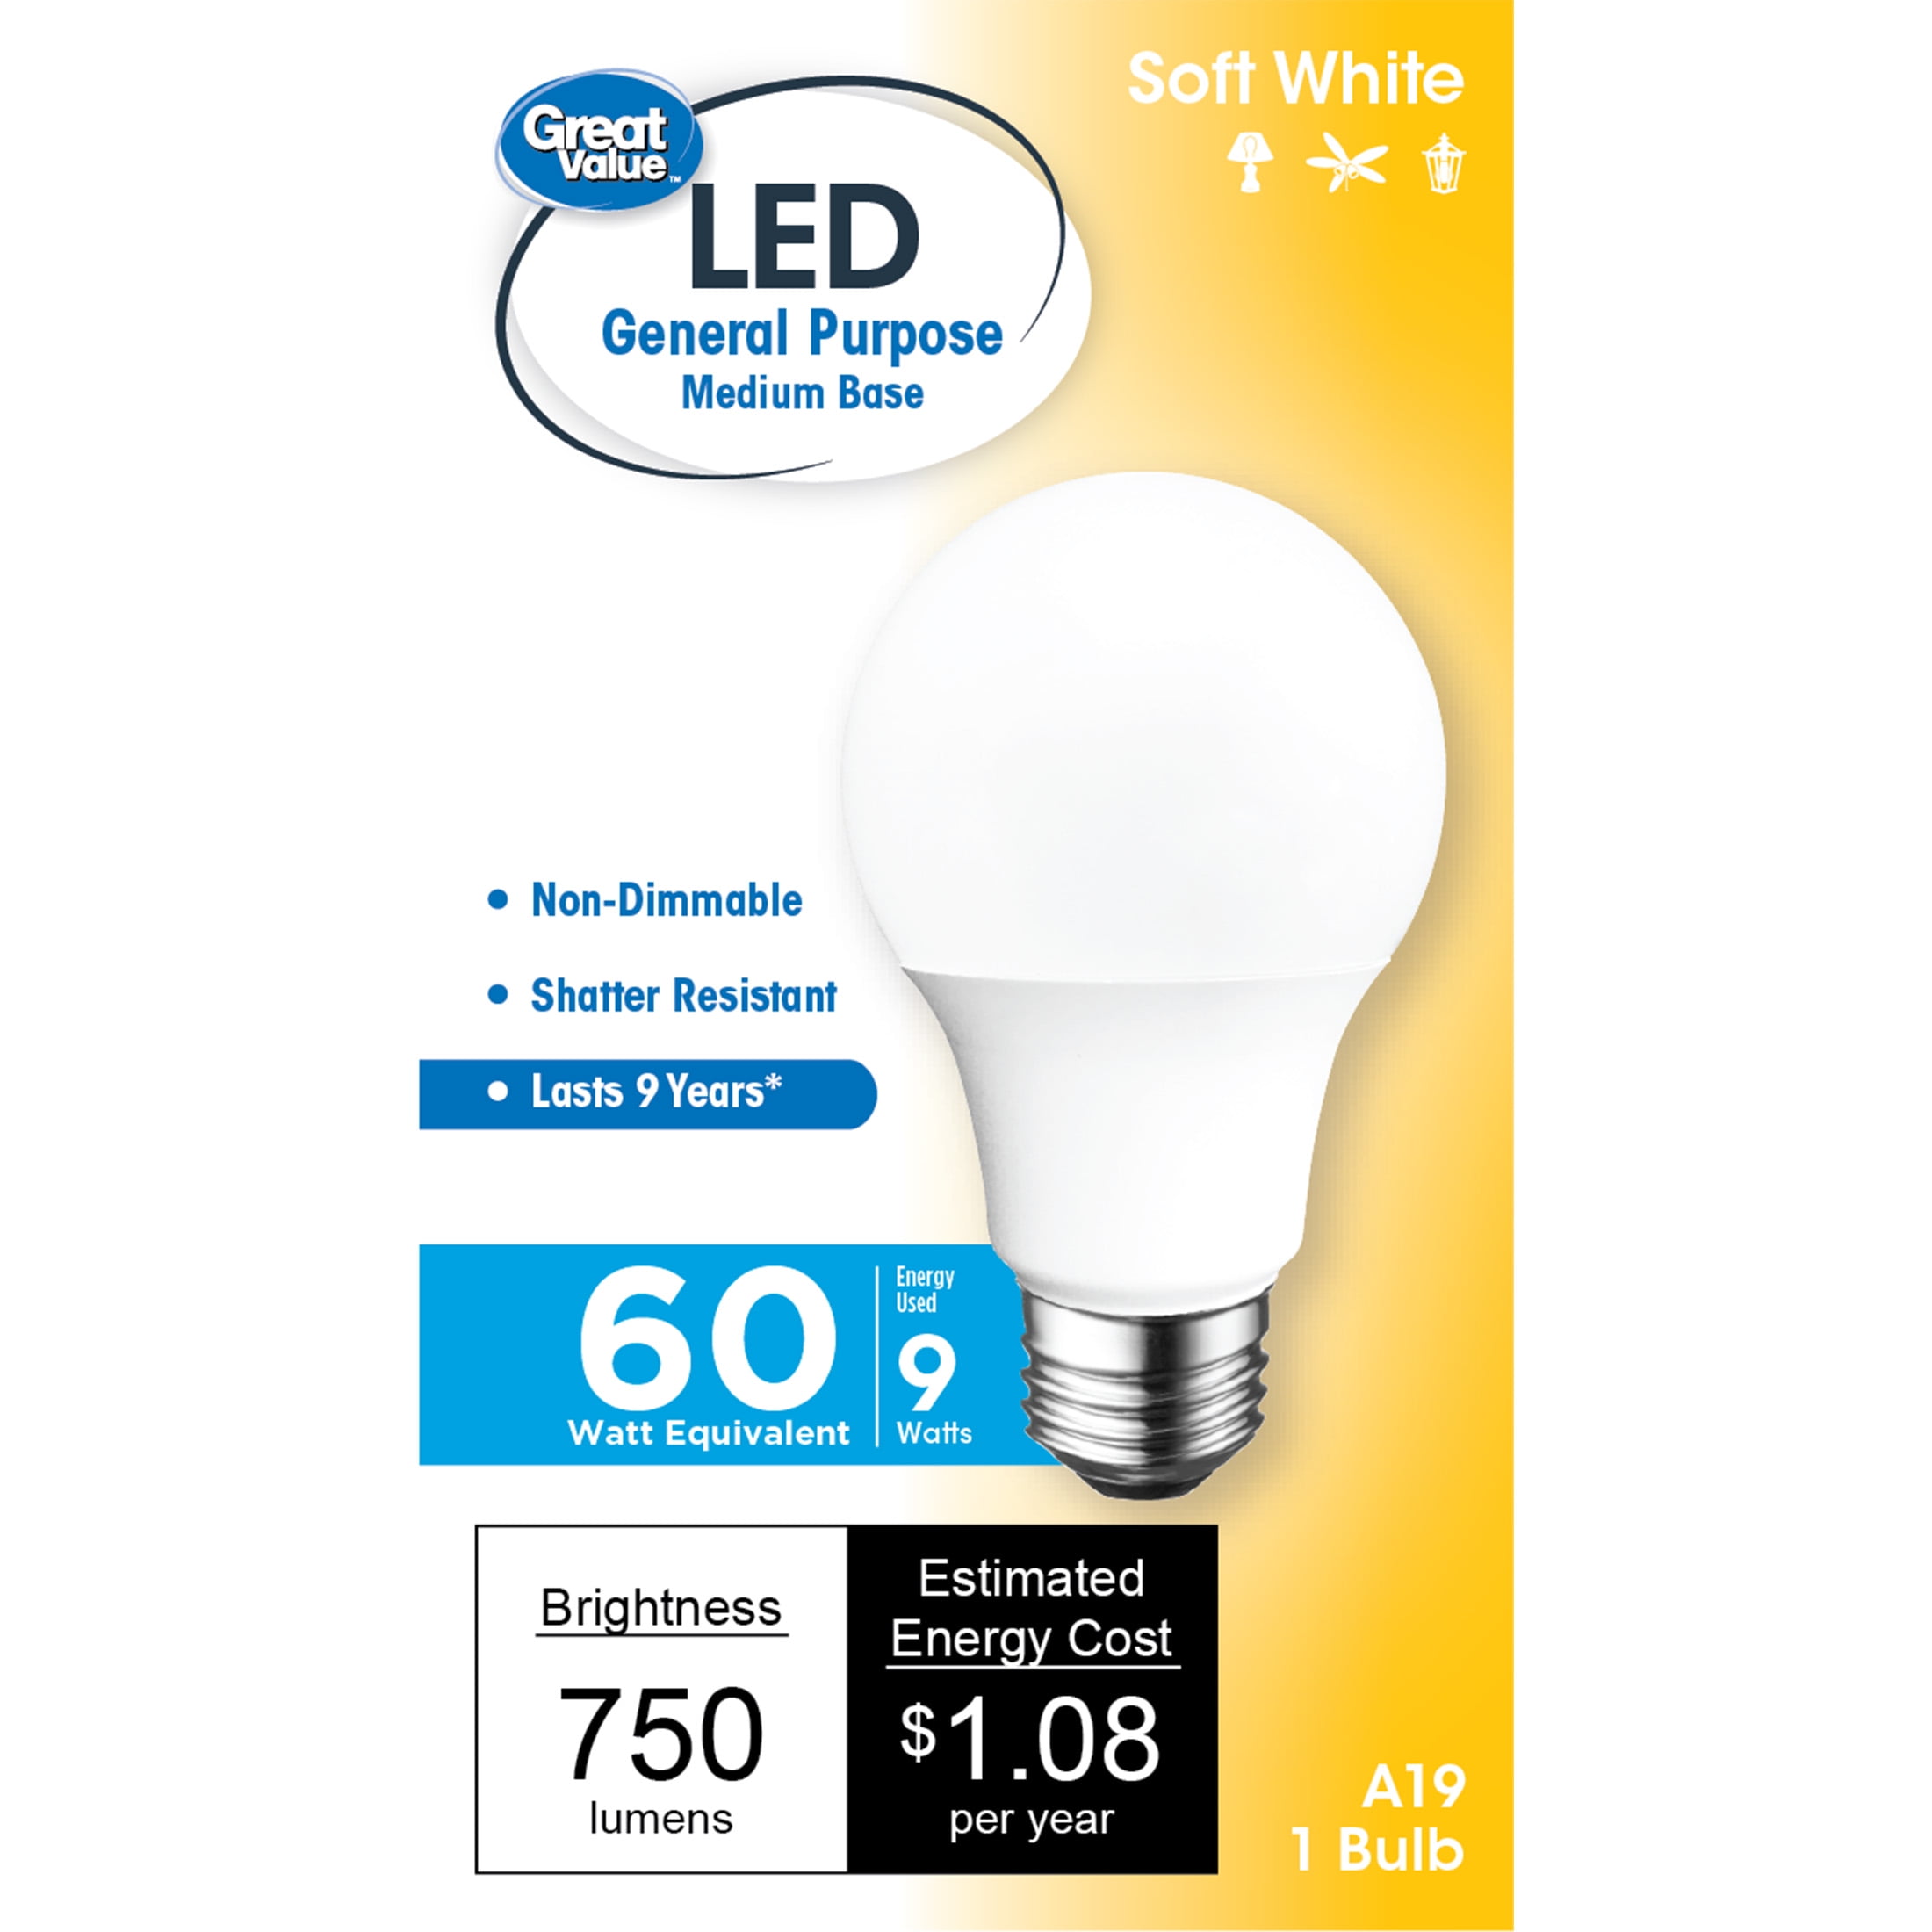 Great Value LED Light Bulb, 9W (60W Equivalent) A19 General Purpose Lamp E26 Medium Base, Non-dimmable, Soft White, 1-Pack